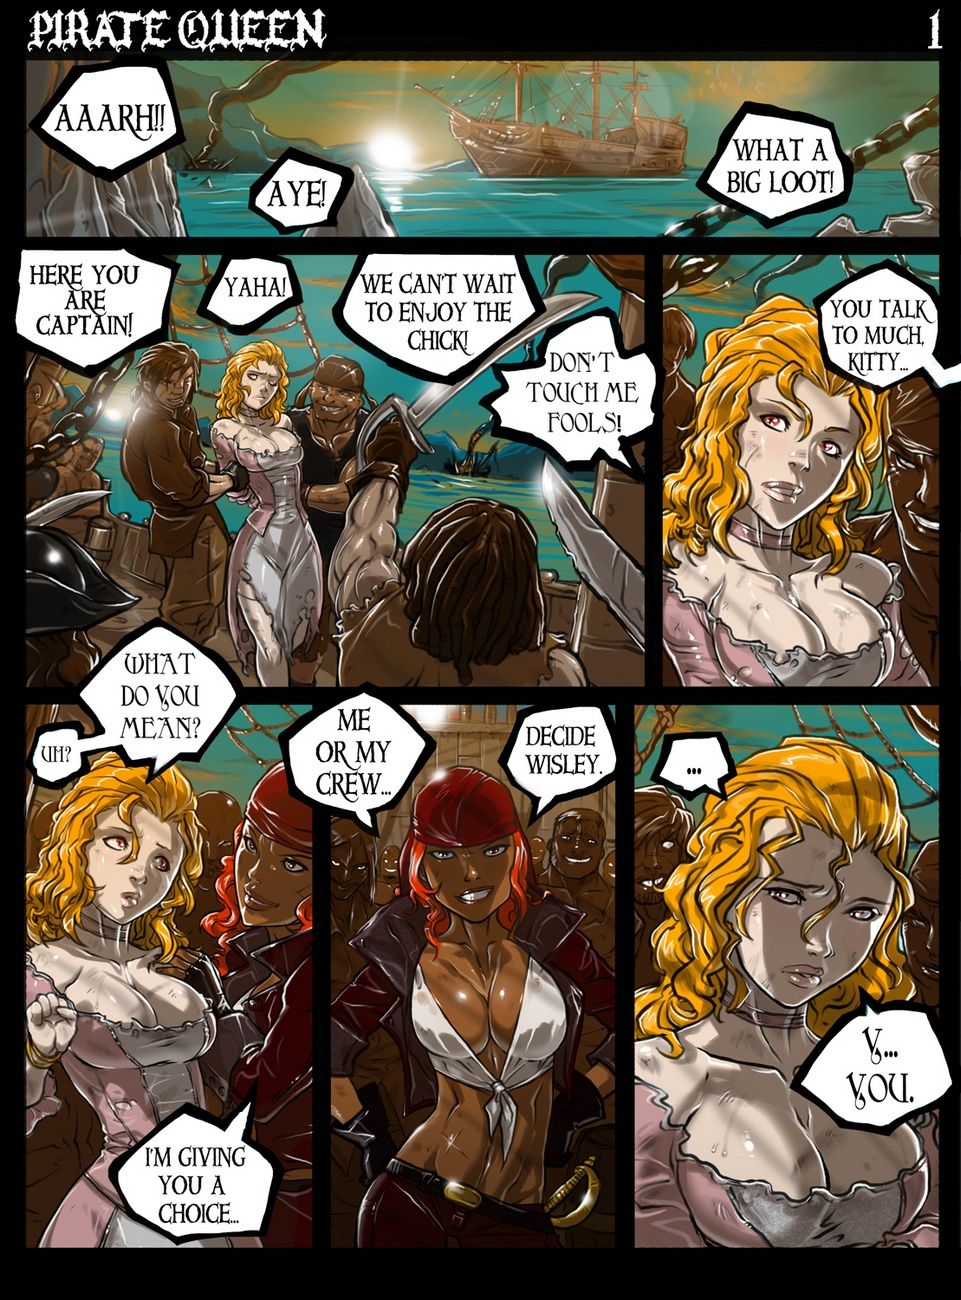 Pirate Queen page 1